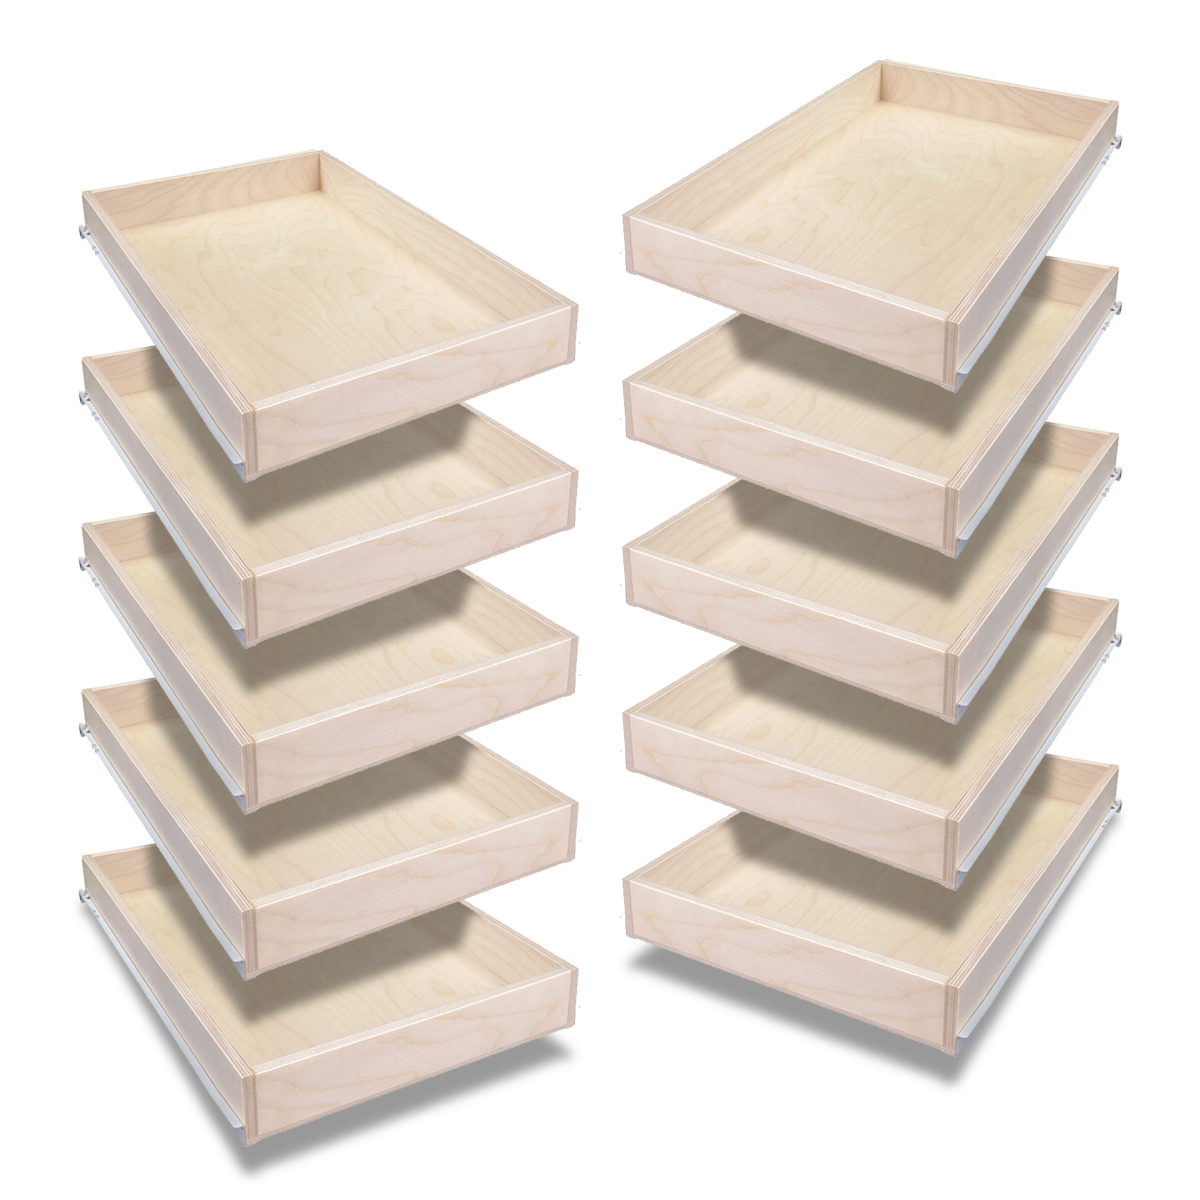 10 Newline Shelves for $579 + Free Shipping